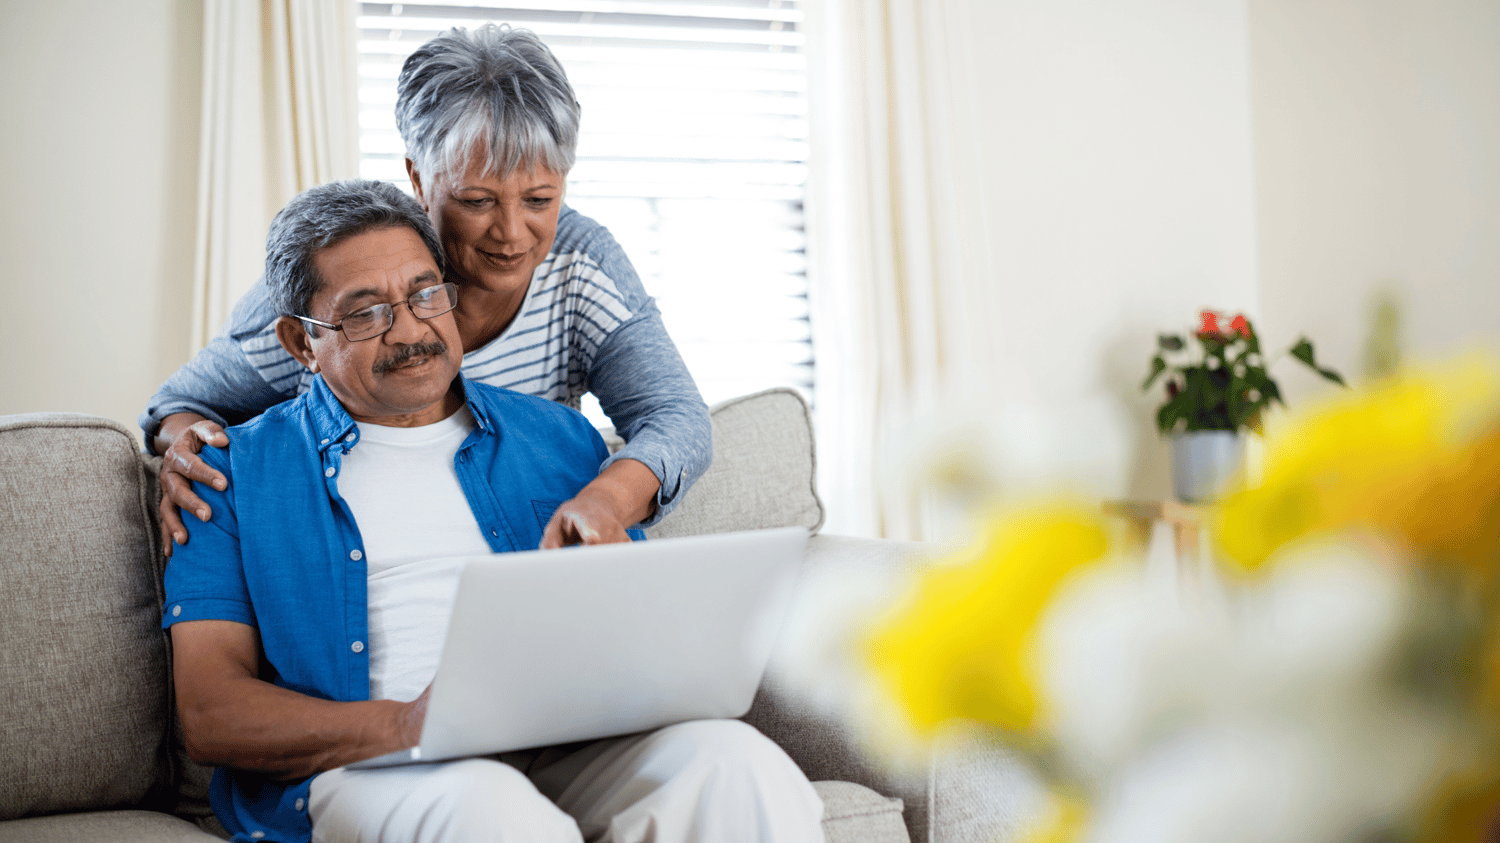 INCORPORATING ANNUITIES INTO YOUR RETIREMENT INCOME STRATEGY